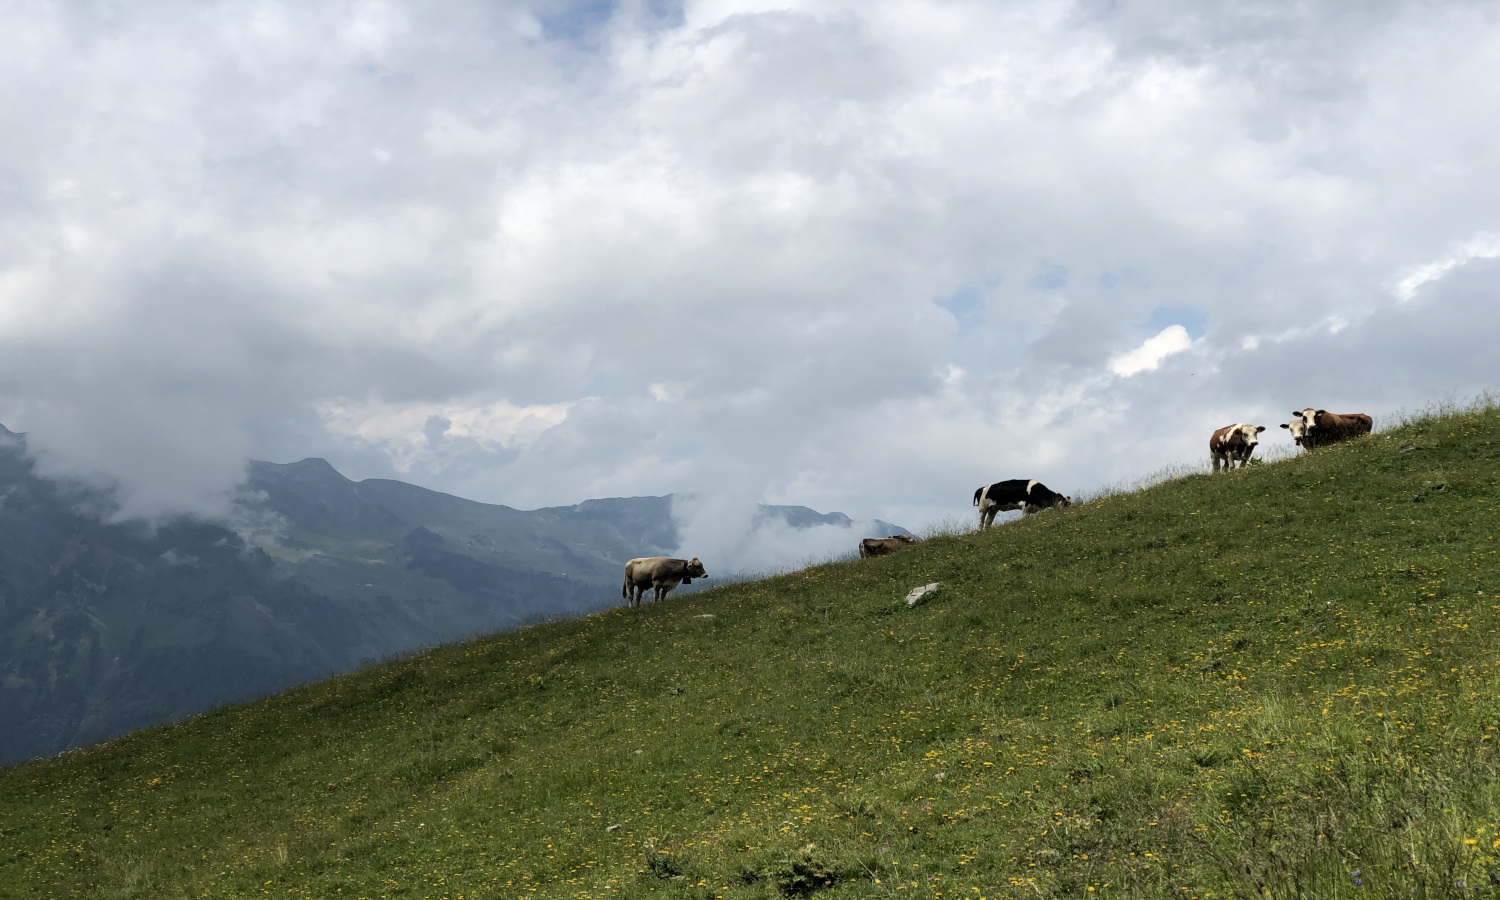 Natural grasslands store carbon and counter climate change, but livestock and pasture expansion is turning the world’s grasslands into carbon sources.